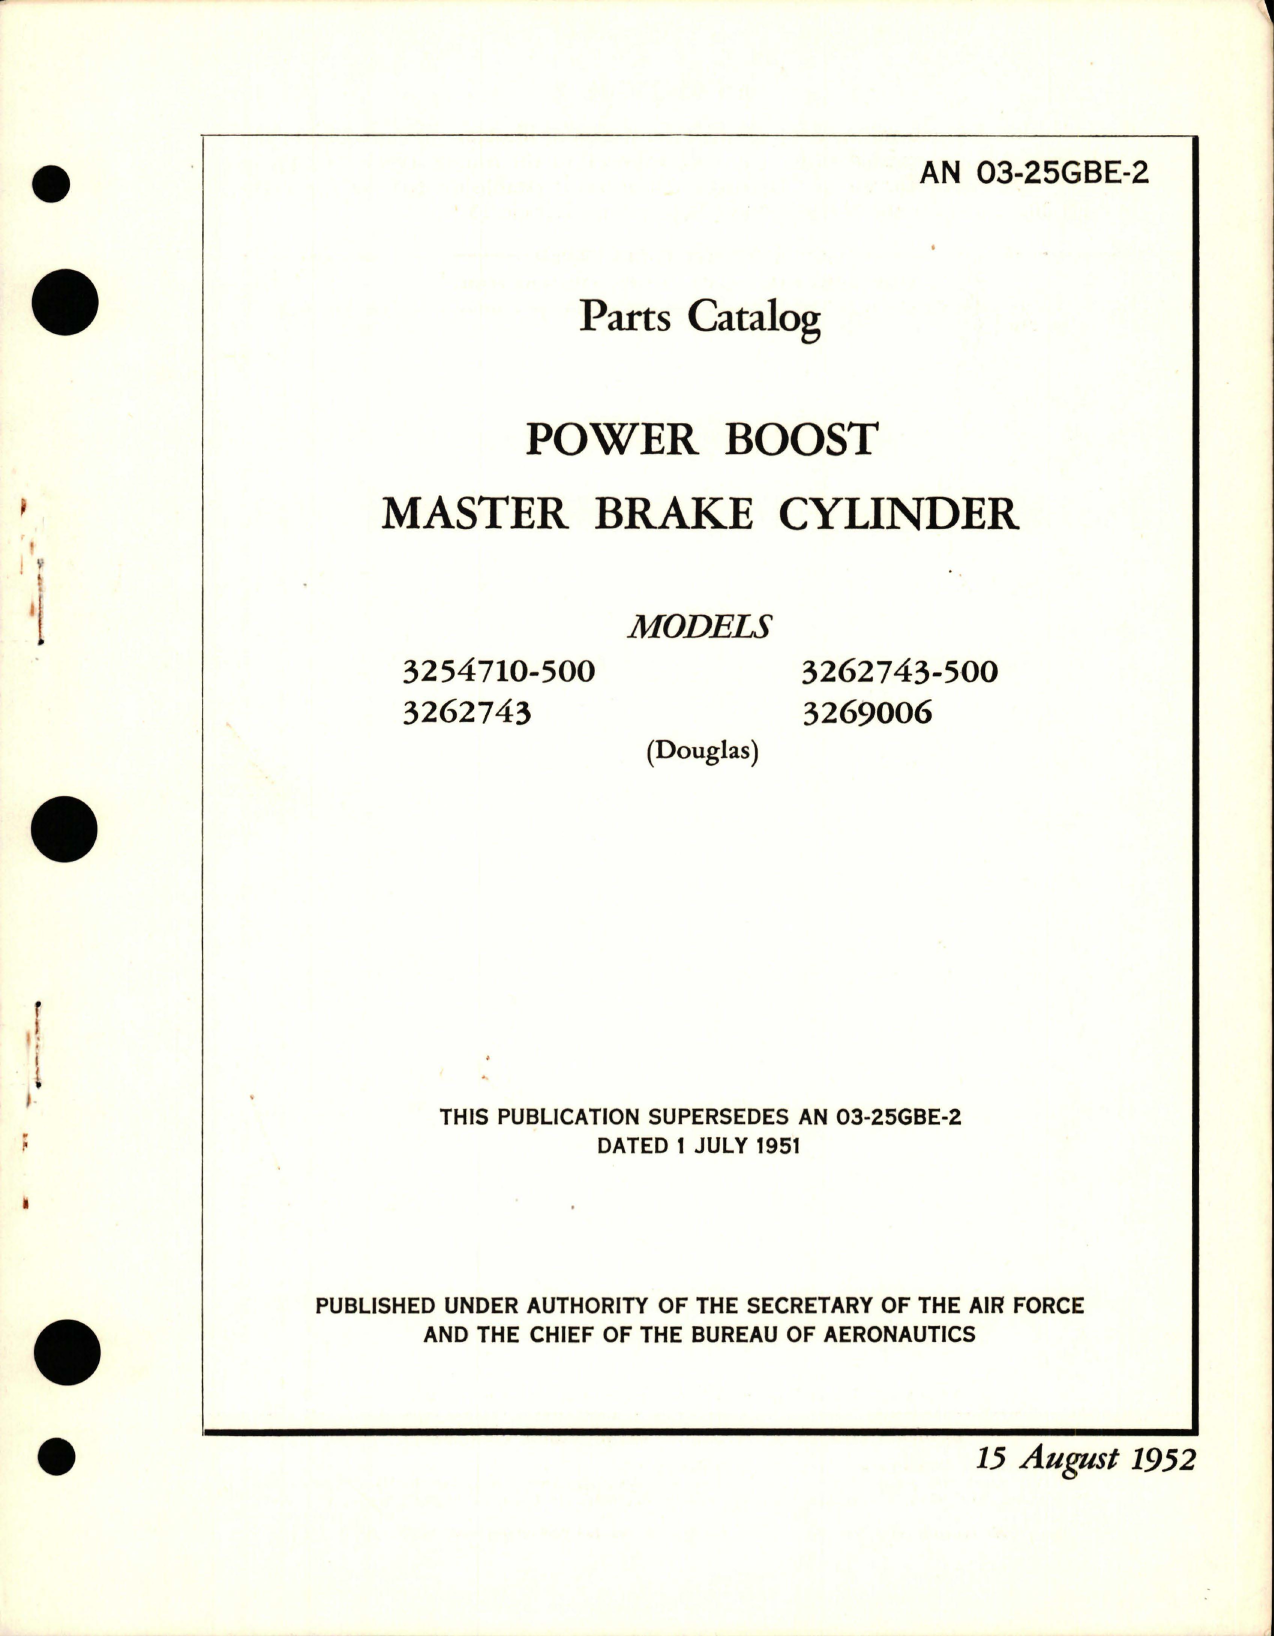 Sample page 1 from AirCorps Library document: Parts Catalog for Power Boost Master Cylinder - Models 3254710-500, 3262743, 3262743-500, 3269006